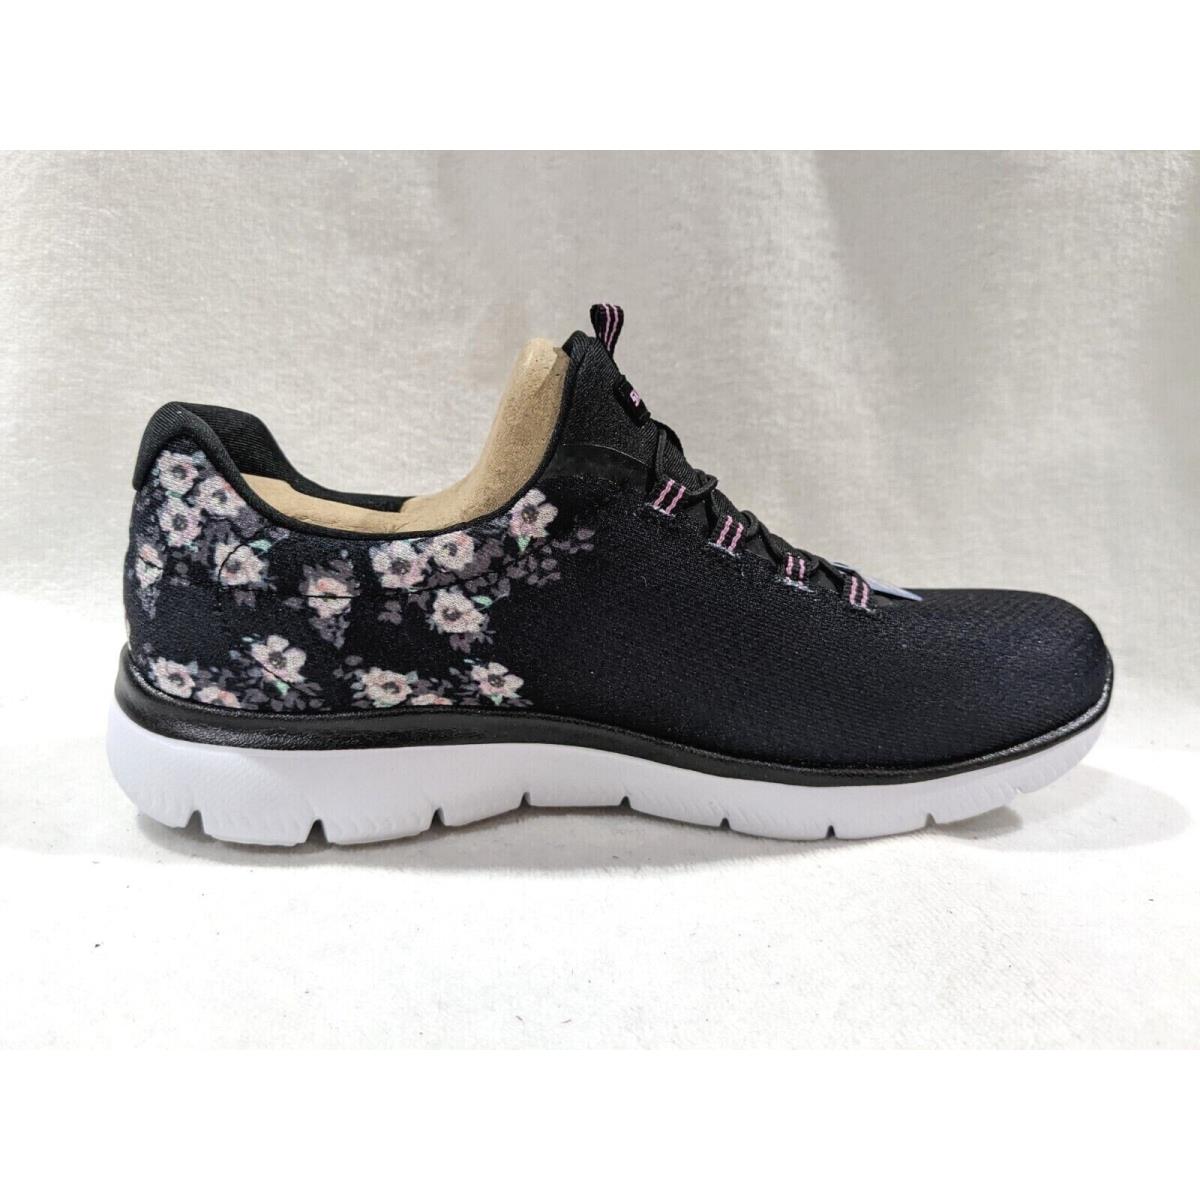 Skechers shoes Summits Perfect Blossom - Black 6